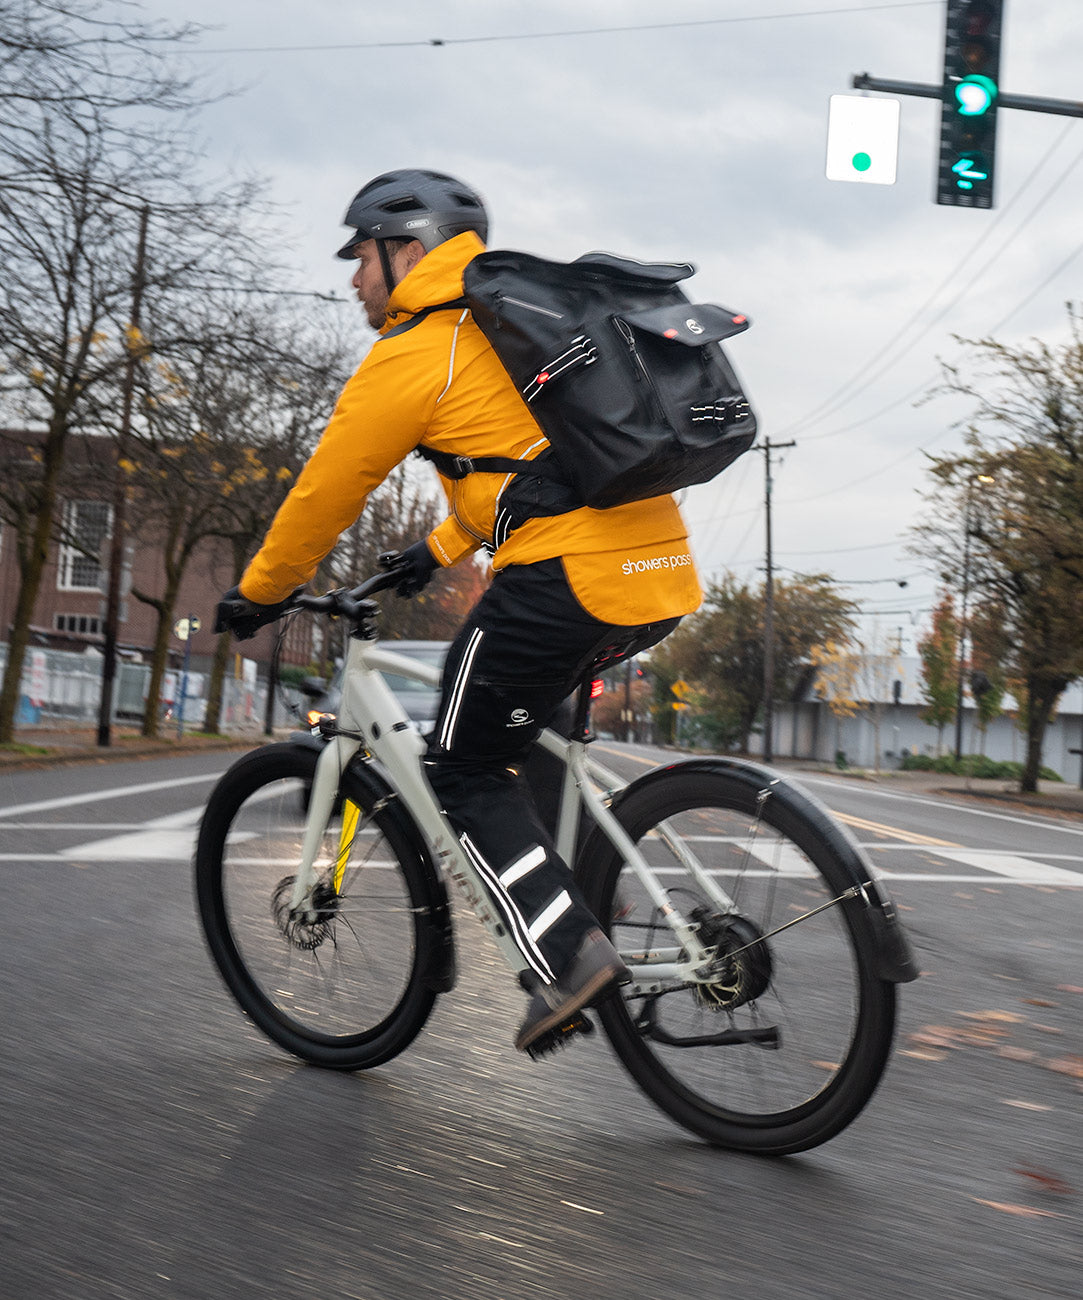 Go from Bike Lane to Boardroom with Rhone's Commuter Pant - The Manual